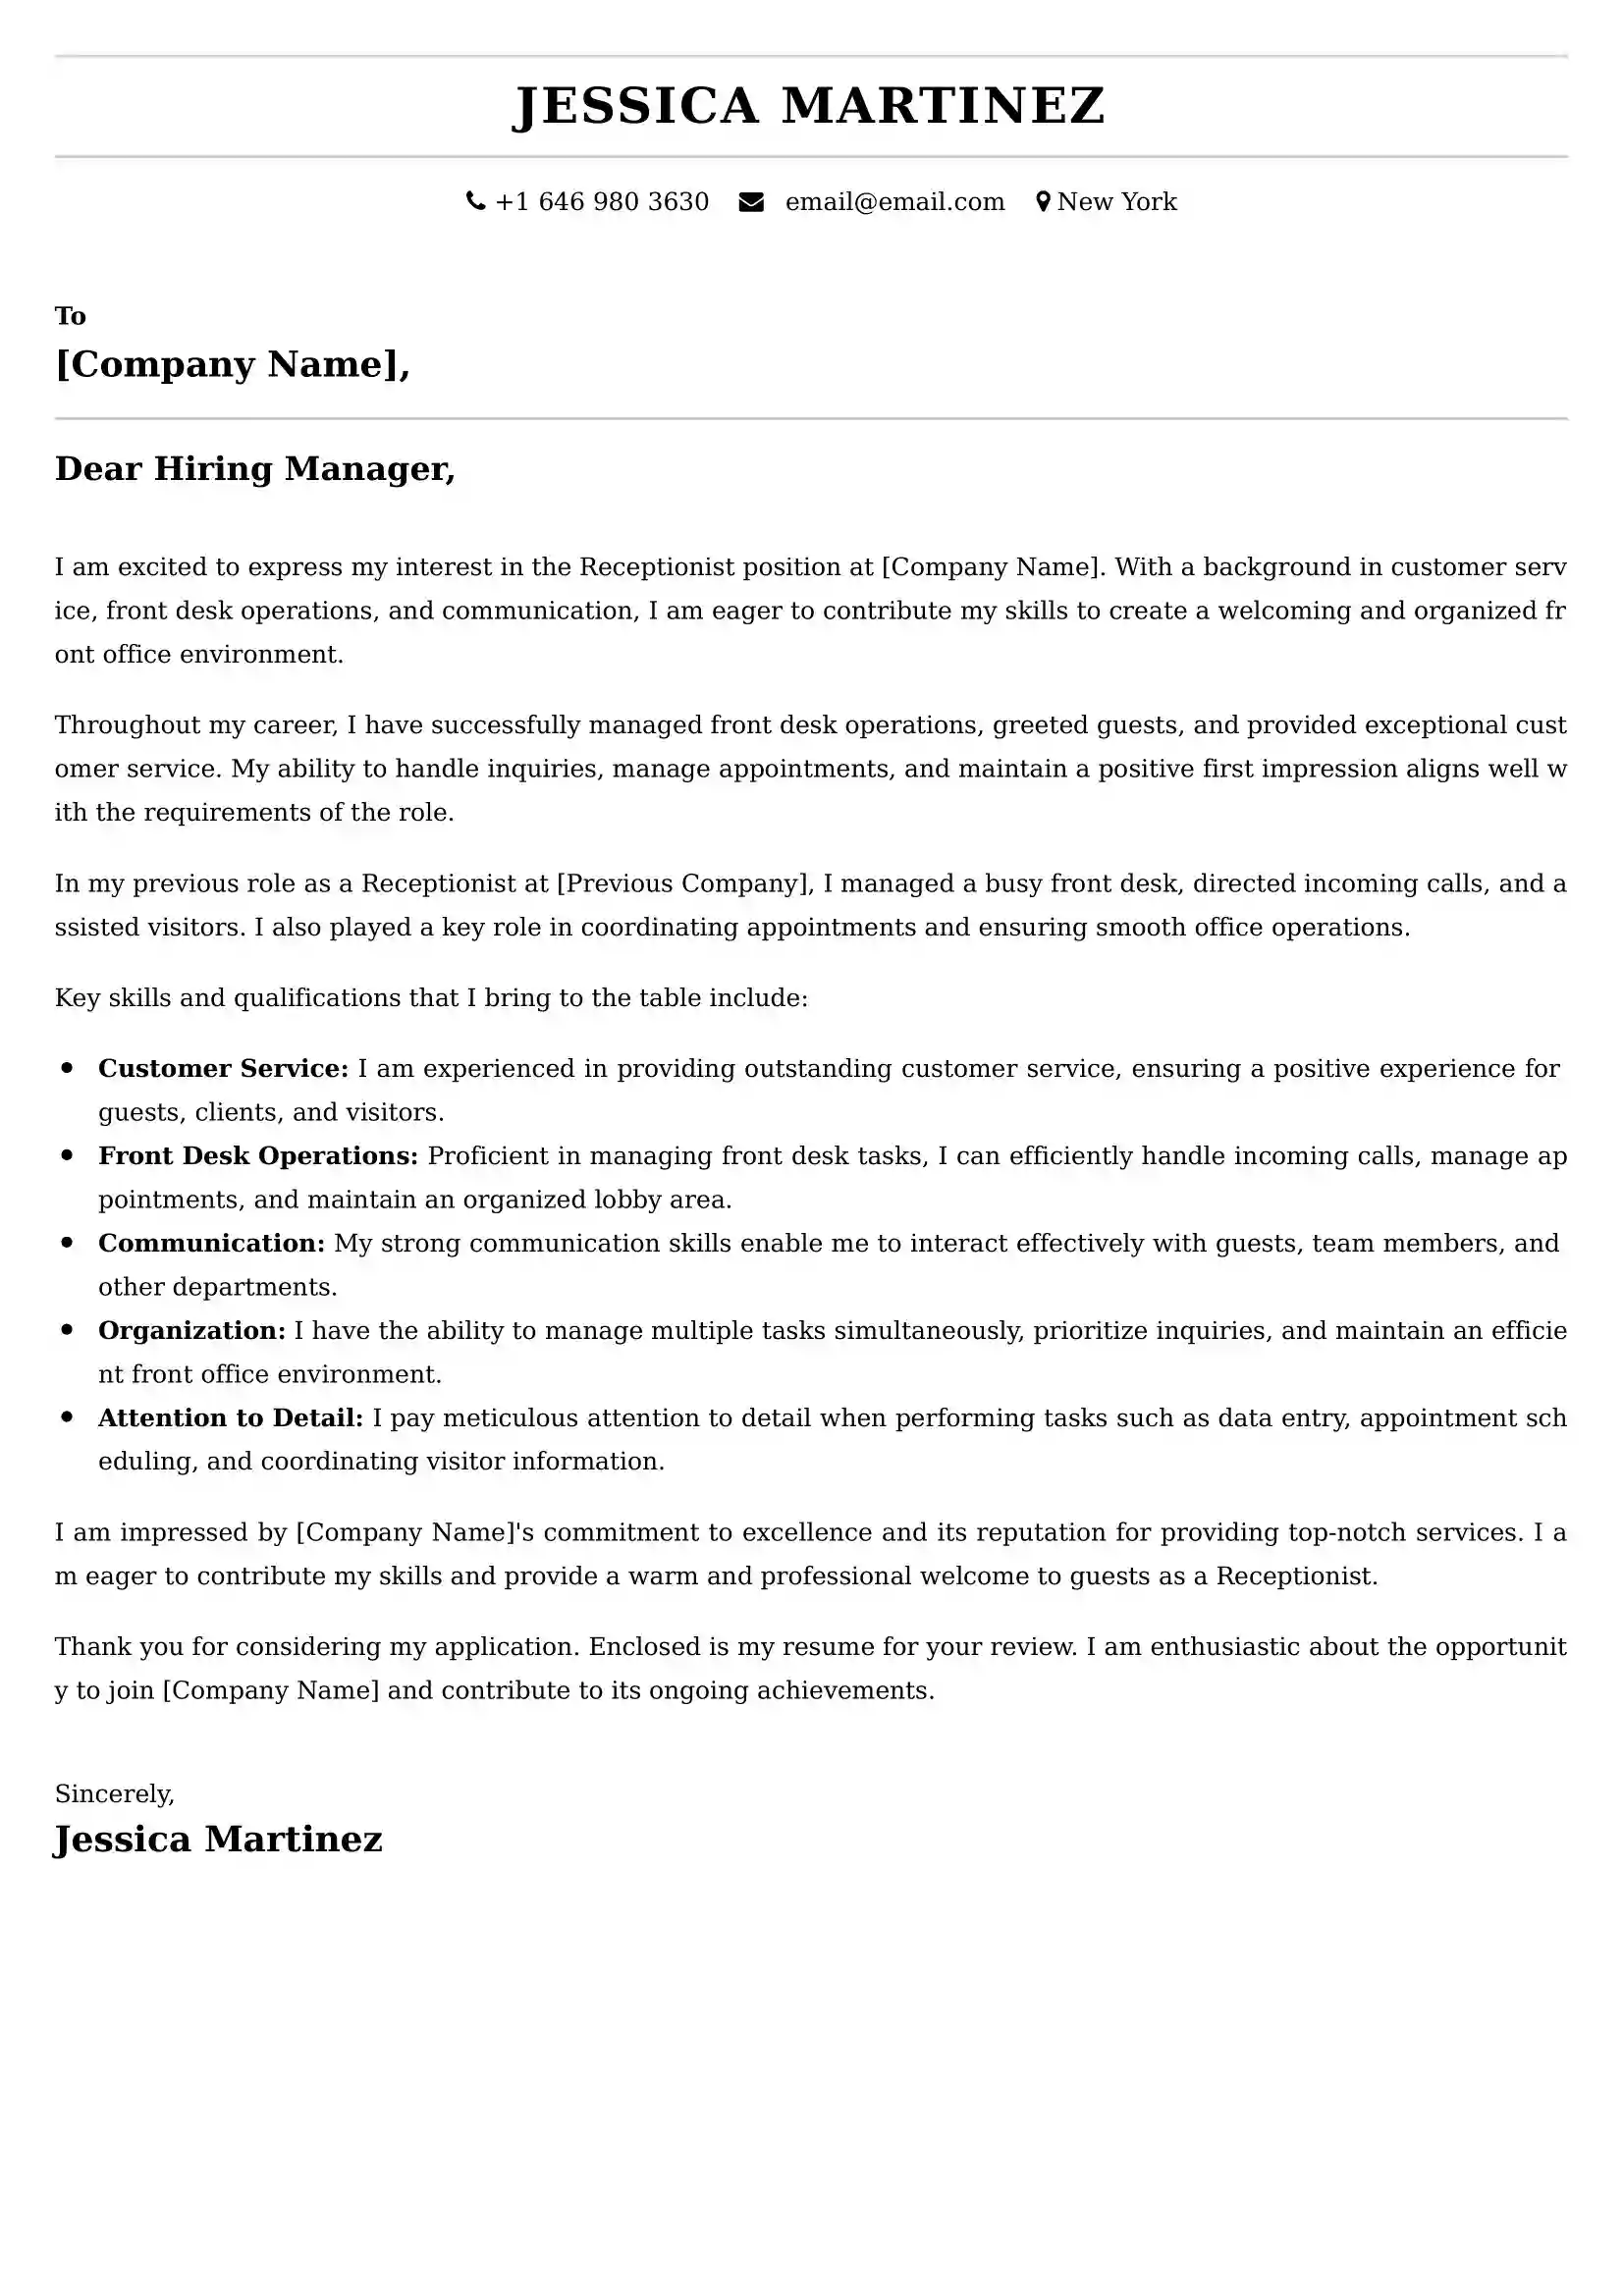 Receptionist Cover Letter Examples Australia